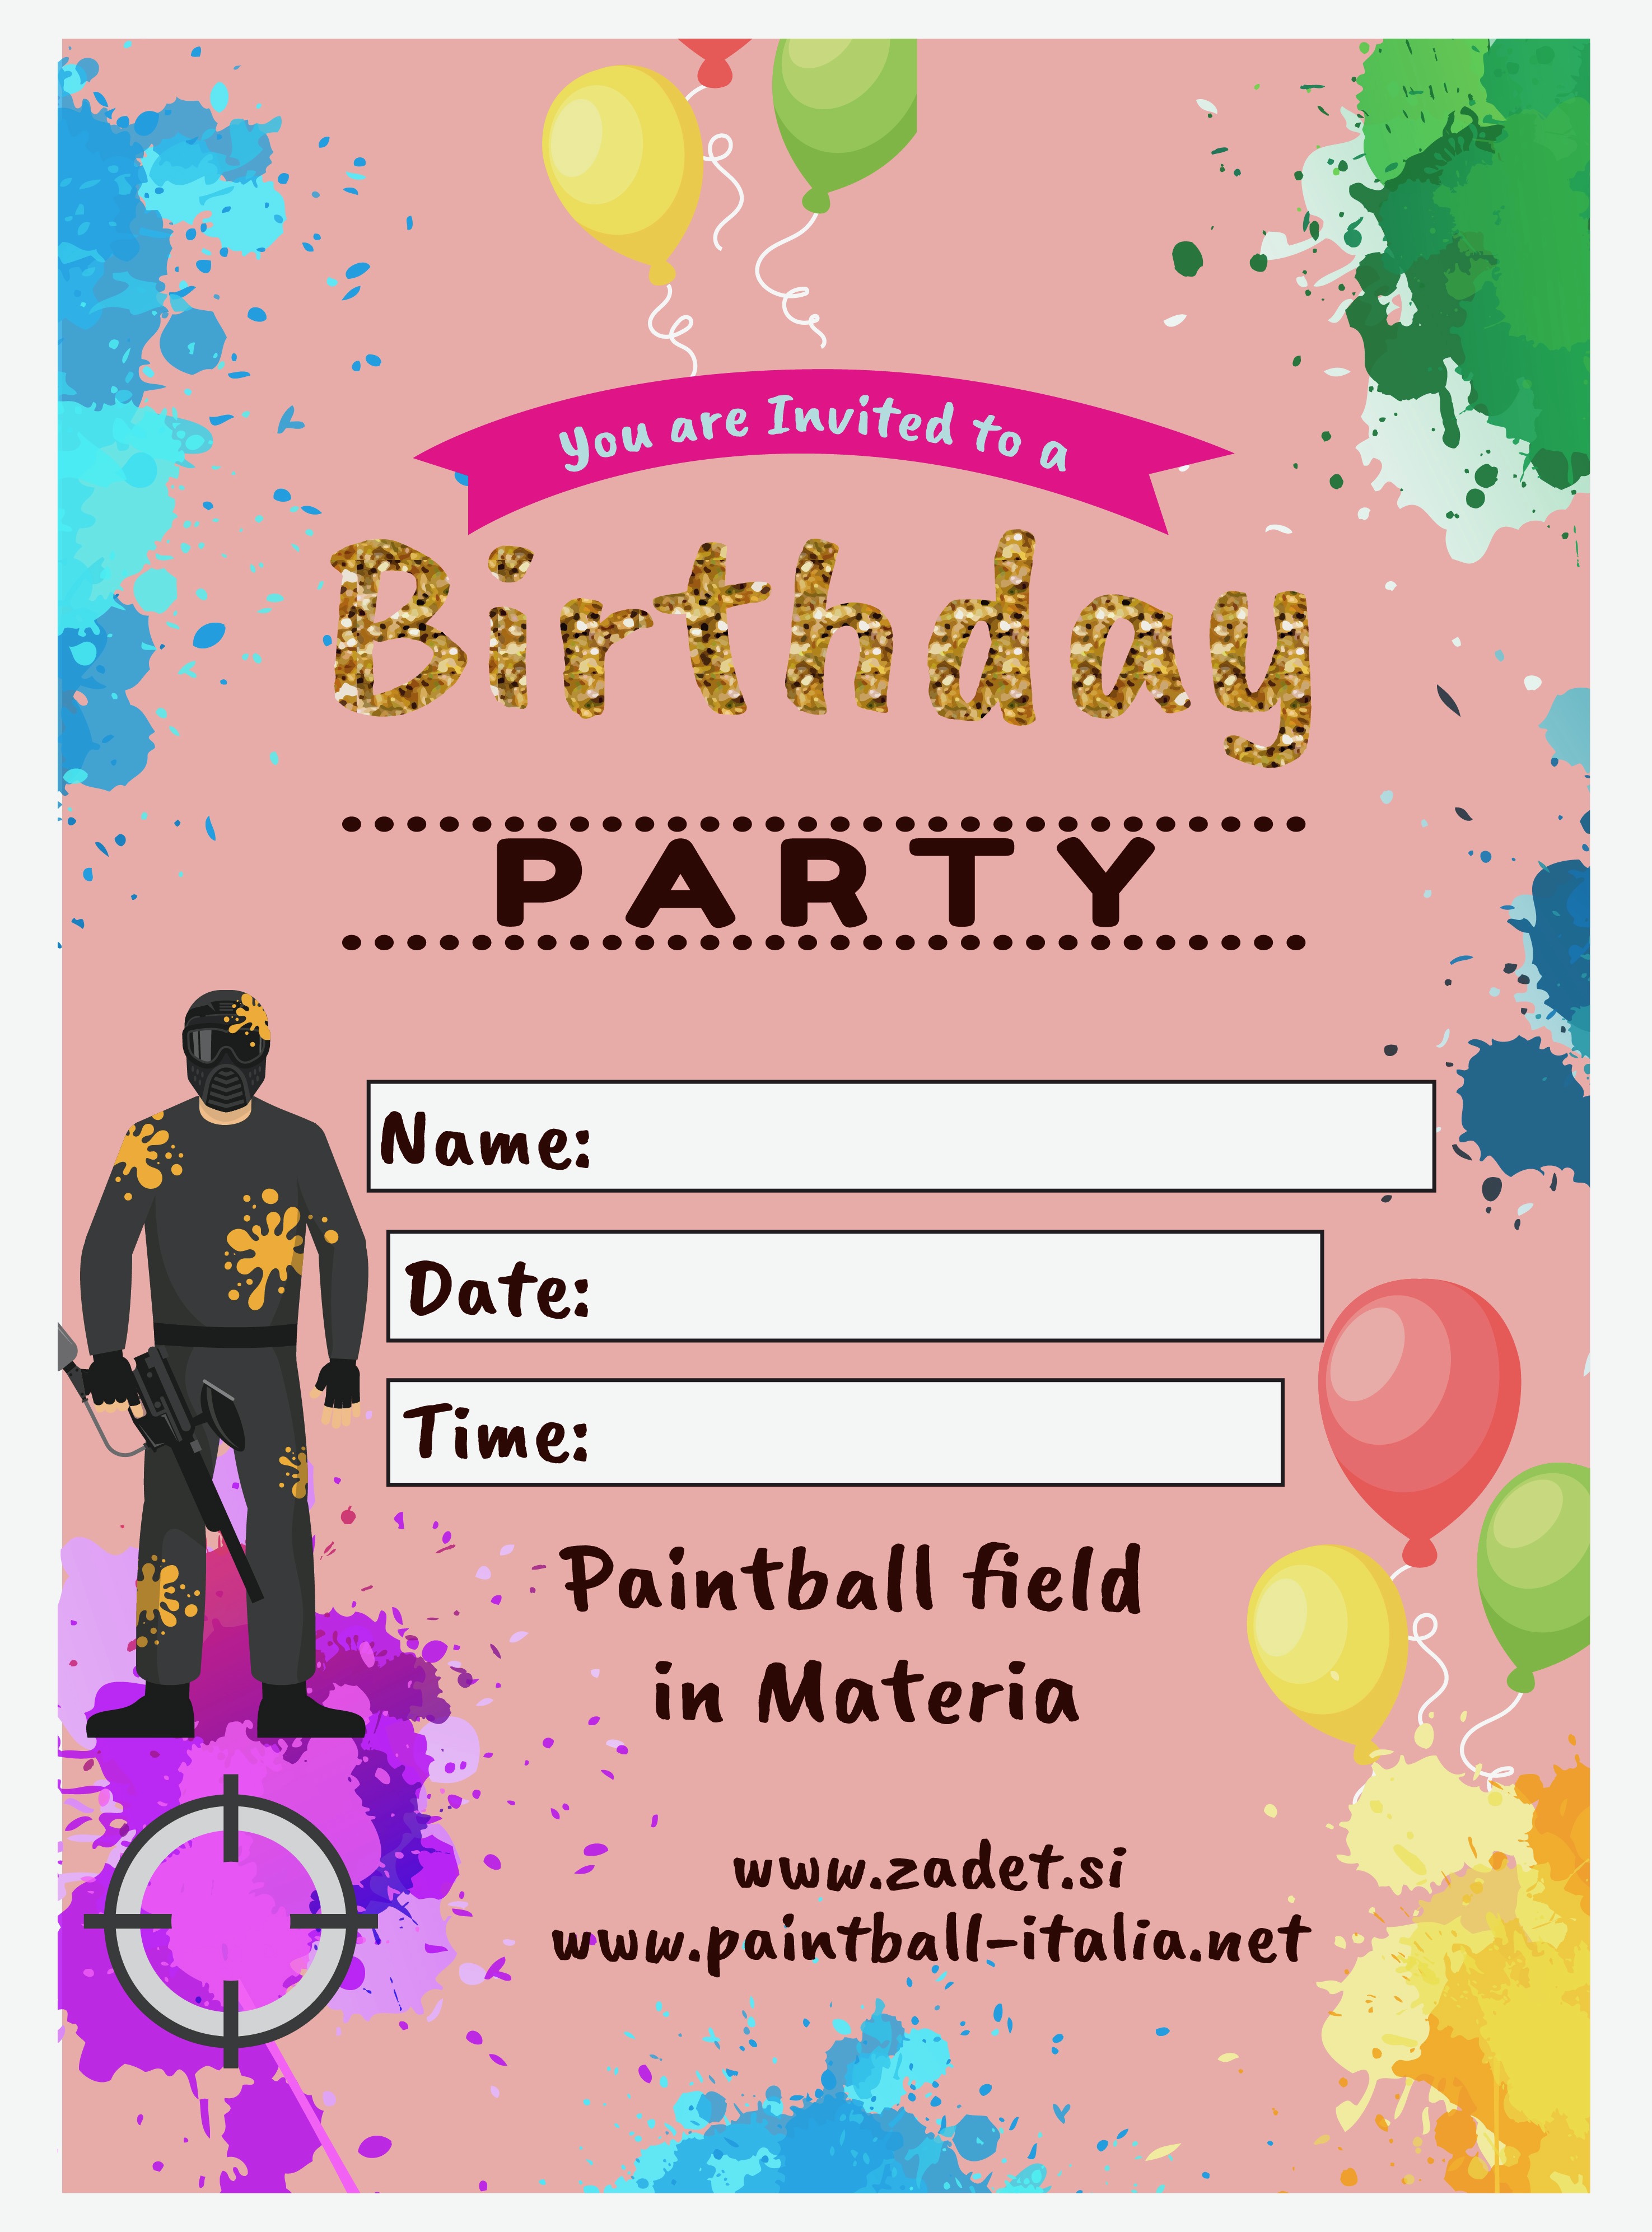 paintball invitaiton for kids birthday party